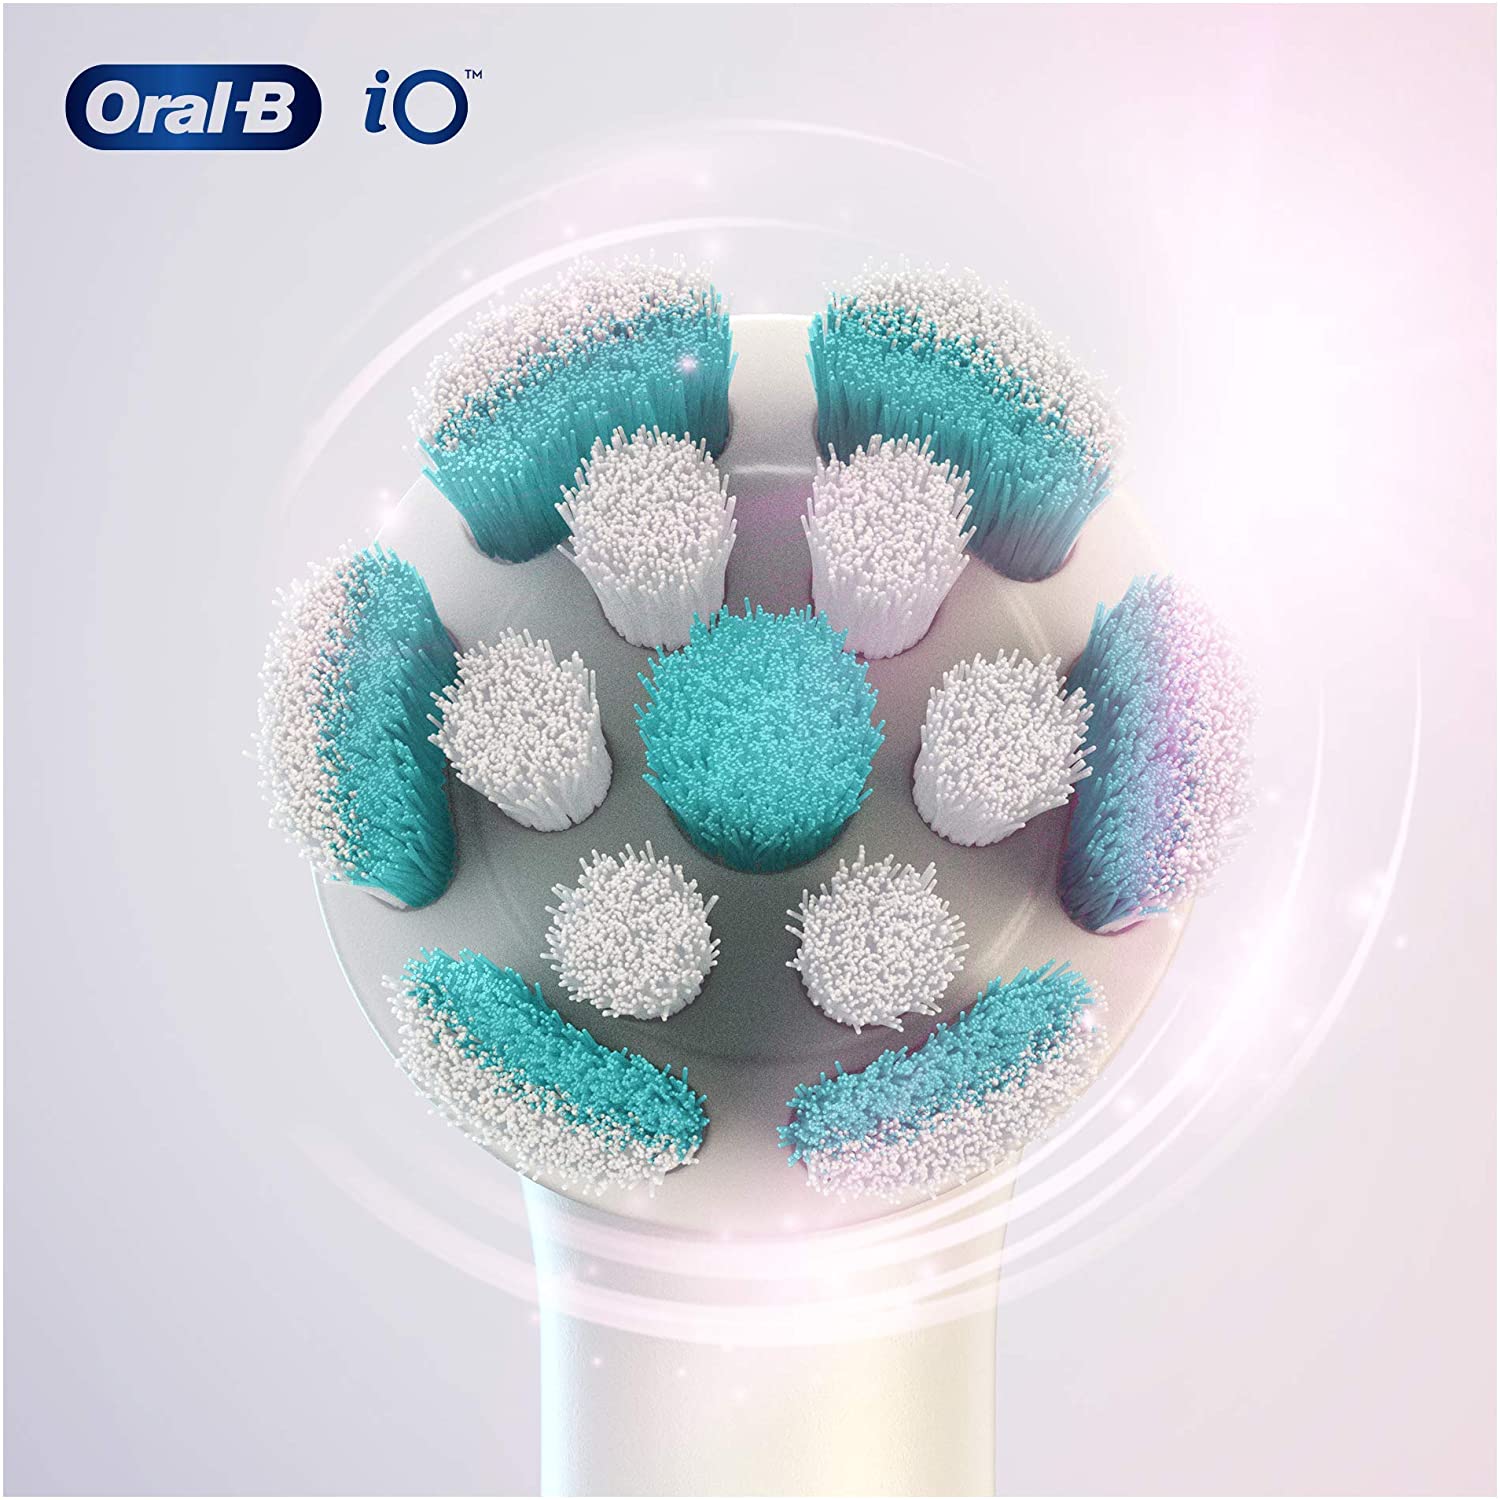 Oral-B iO 6pk Gentle Cleaning Toothbrush Heads for Sensational Mouth Feeling - Healthxpress.ie